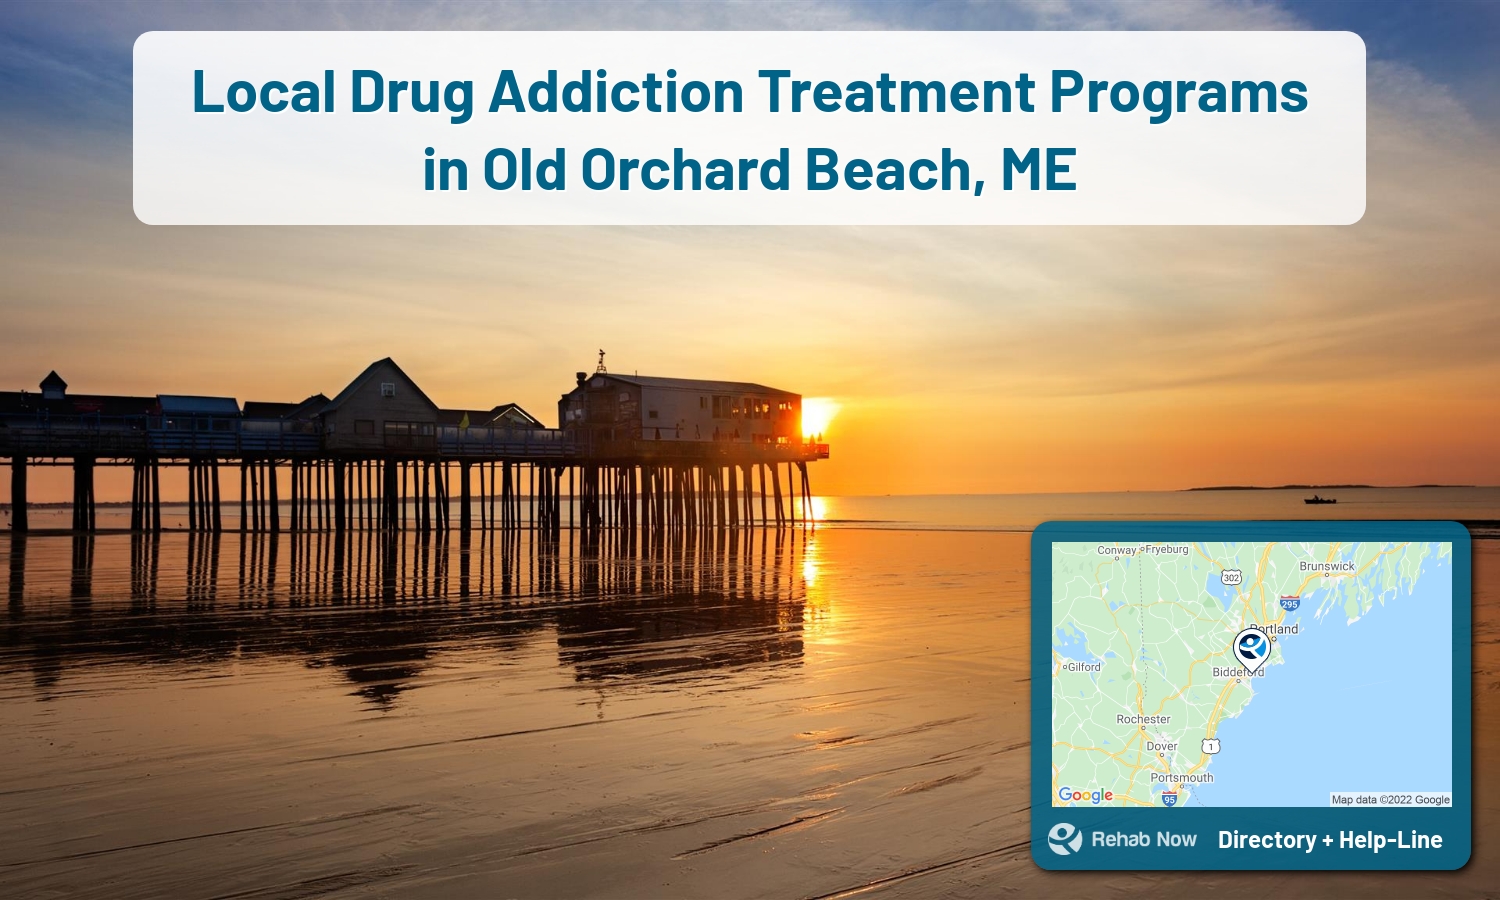 Old Orchard Beach, ME Treatment Centers. Find drug rehab in Old Orchard Beach, Maine, or detox and treatment programs. Get the right help now!